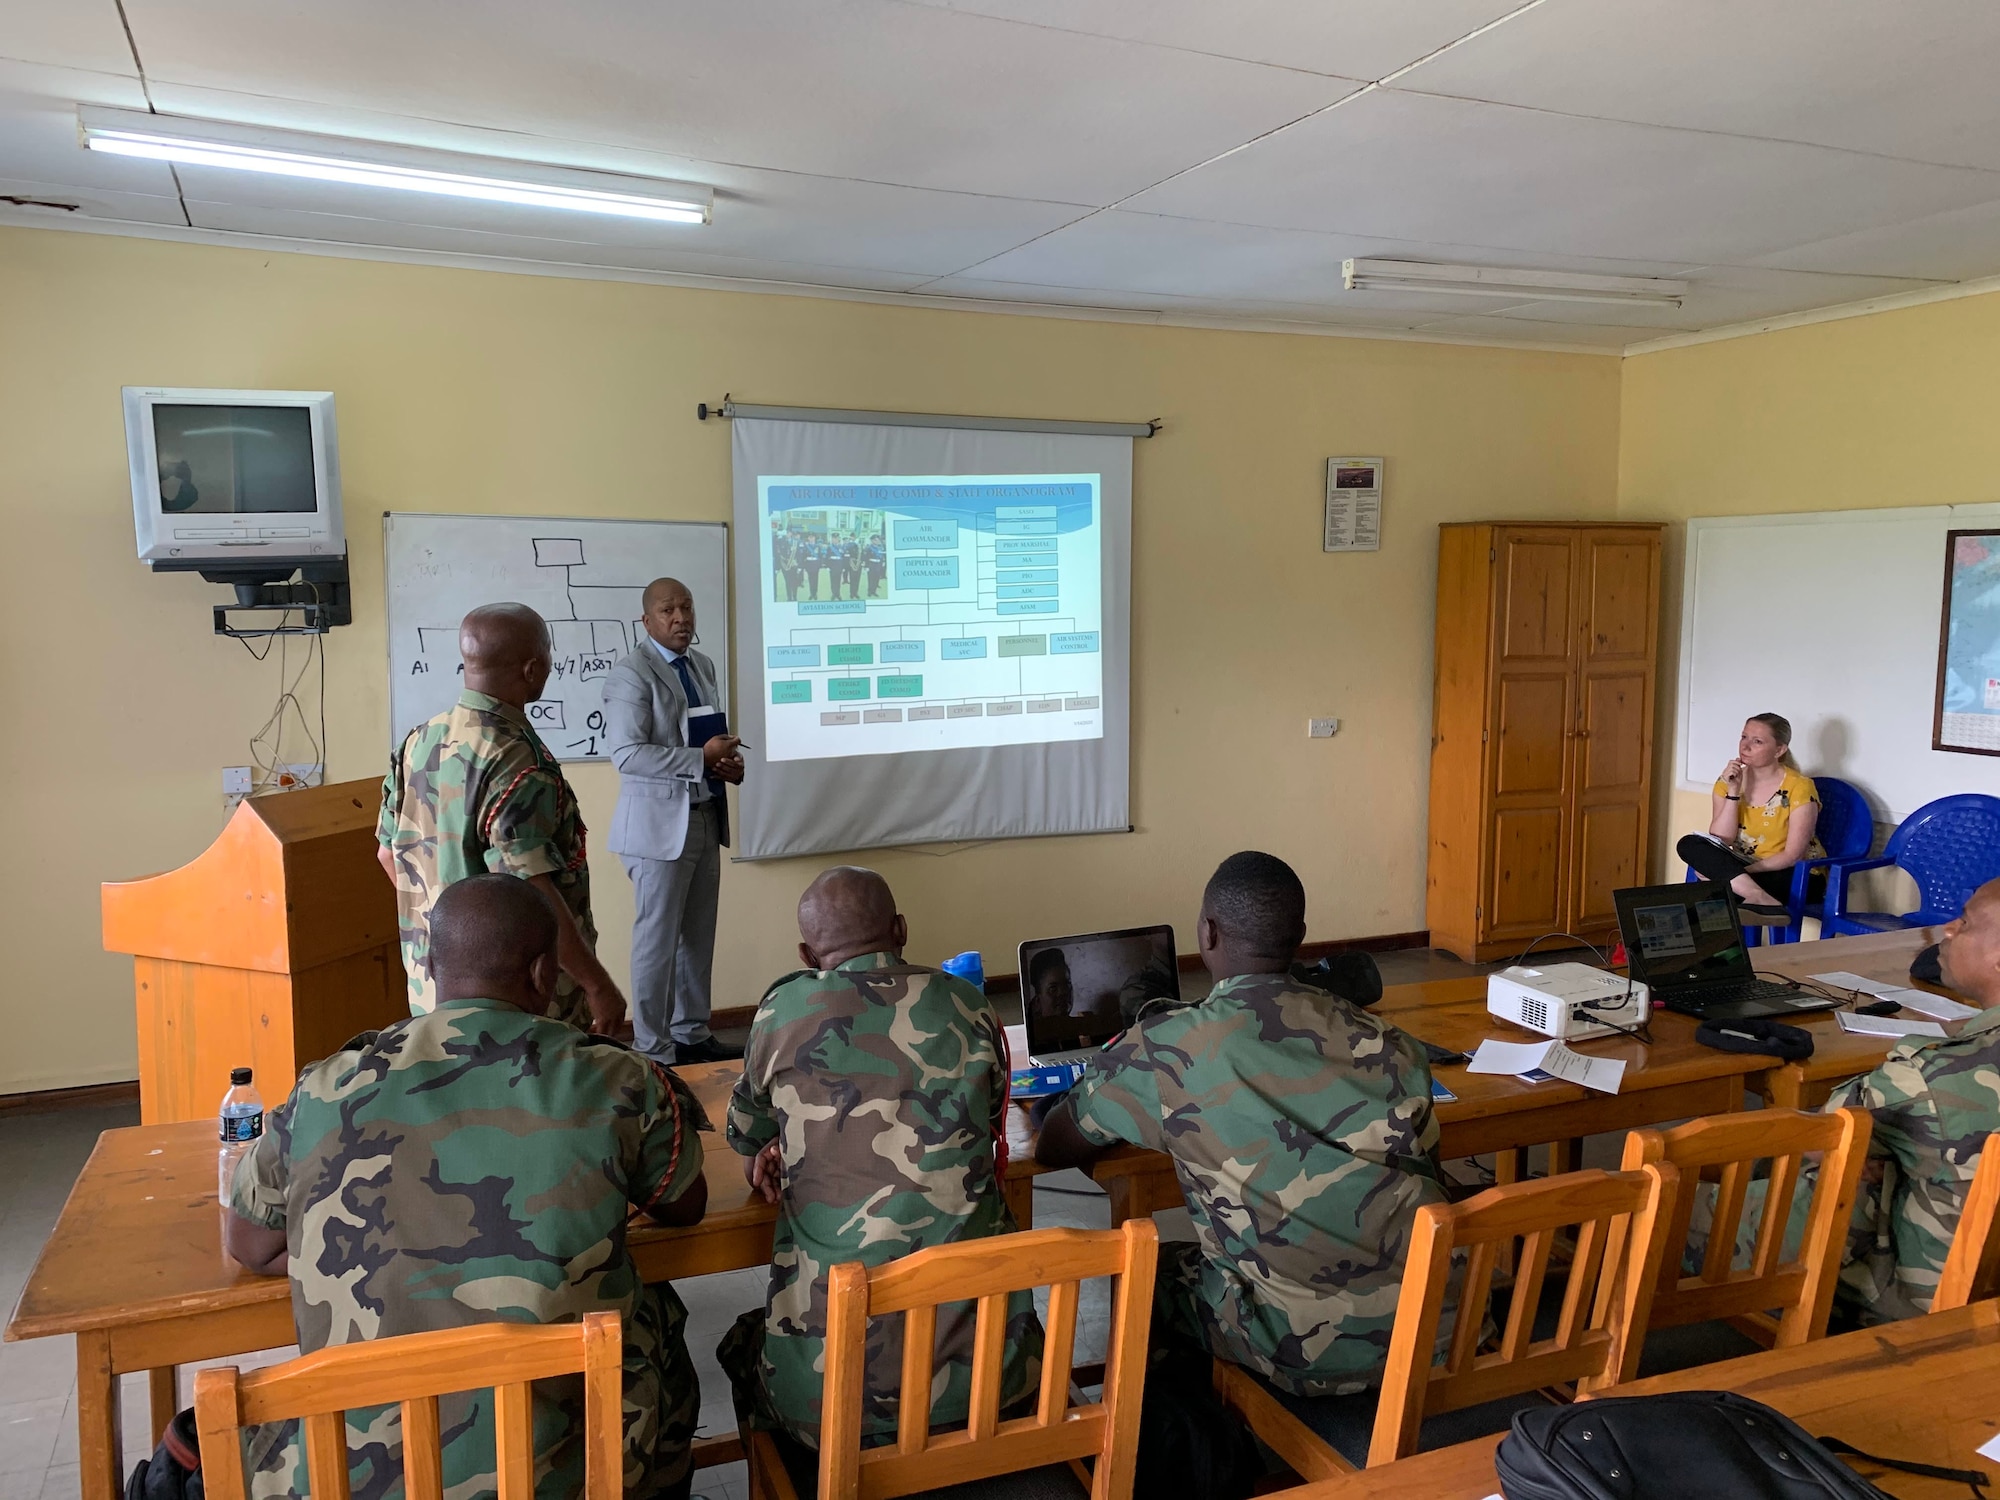 Noel Fachi, U.S. Air Forces in Europe and Air Forces Africa Manpower, Personnel and Services Directorate, Force Development team, briefs continuous process improvement to members of the Malawian air force at Lilongwe Air Base, Malawi, Jan. 14, 2020. Fachi leads a force development team that has been working with the Malawian air force since 2018 to build partnership capacity in the region. (U.S. Air Force photo by Capt. Korey Fratini)